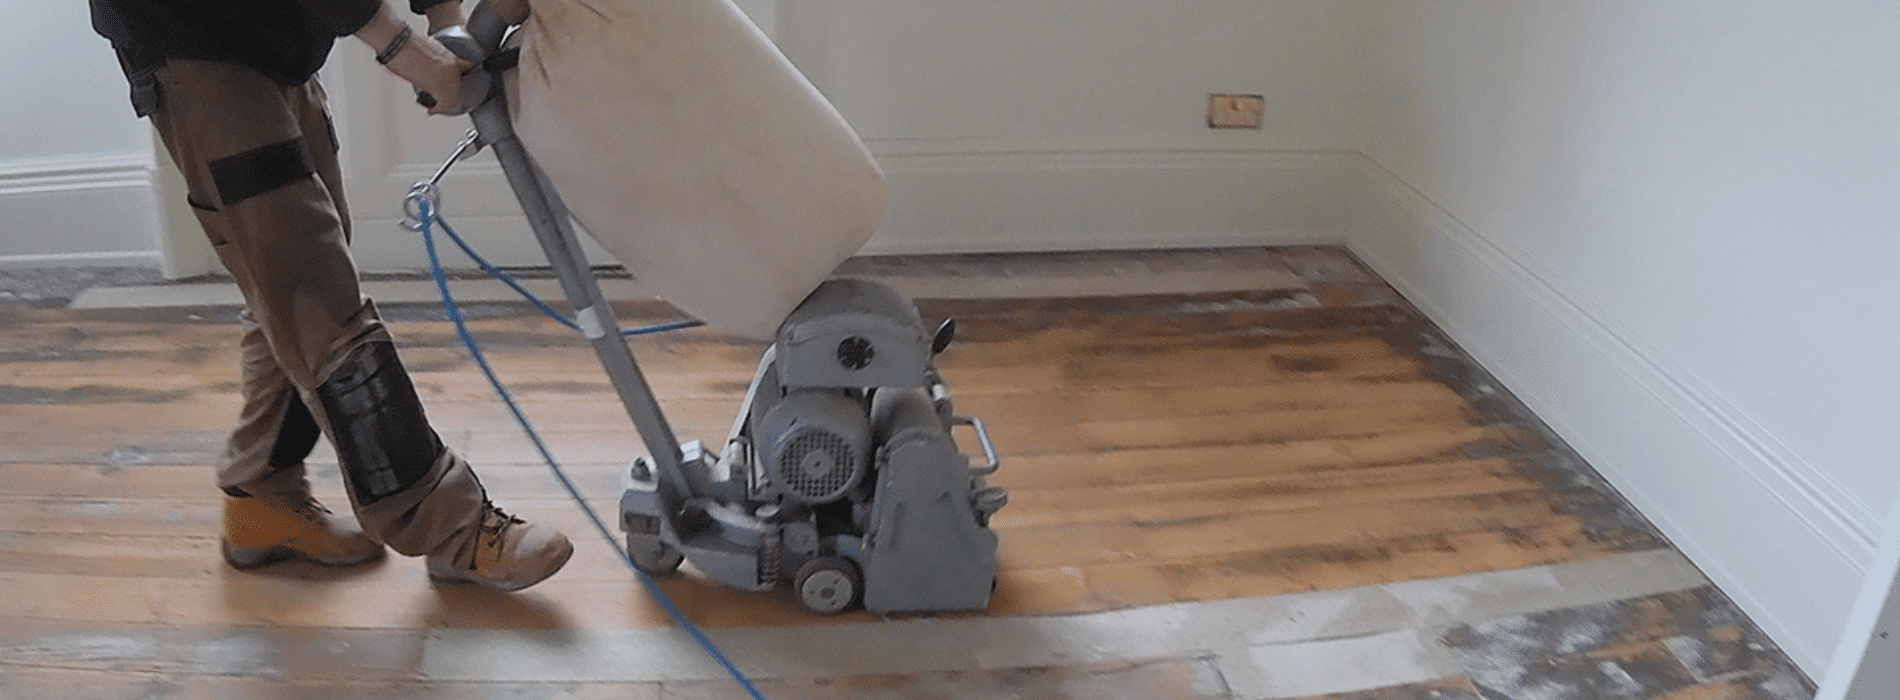 Mr Sander® use a Bona Scorpion drum sander, measuring 200mm and with a 1.5 kW power, for sanding herringbone floors in Chislehurst, BR7. It operates at 240V and 50Hz. The sander is connected to a dust extraction system with a HEPA filter, ensuring a thorough and environmentally friendly sanding process.